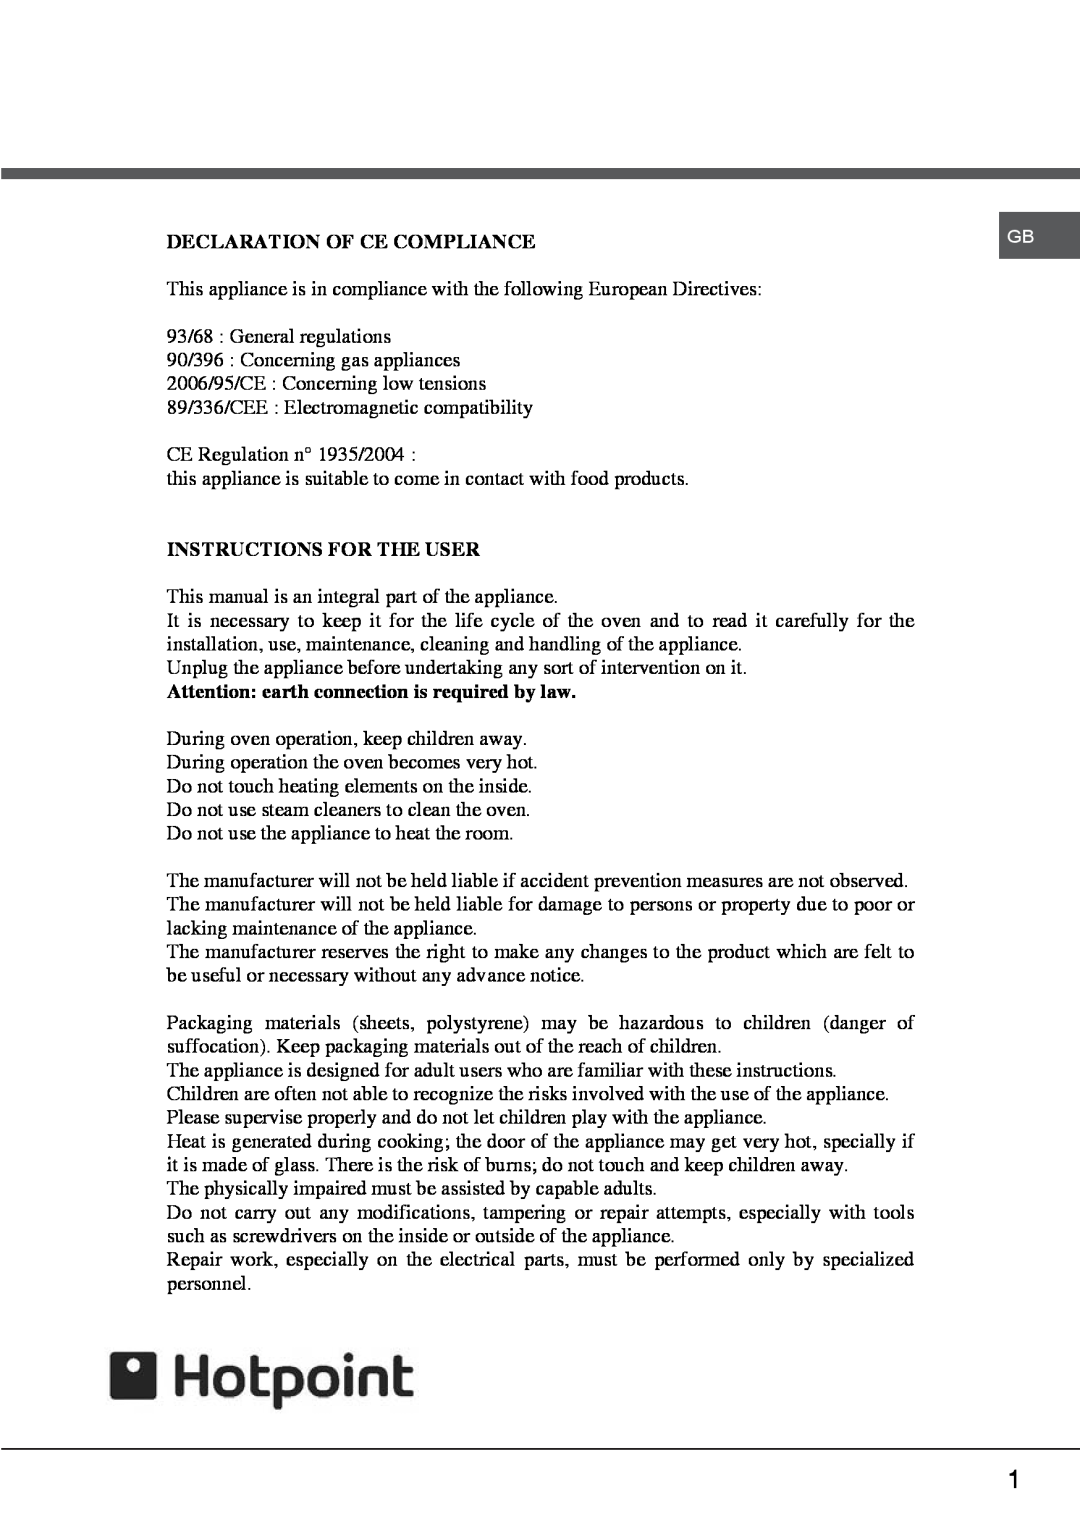 Hotpoint SY23 manual Declaration Of Ce Compliance, Instructions For The User, Attention earth connection is required by law 